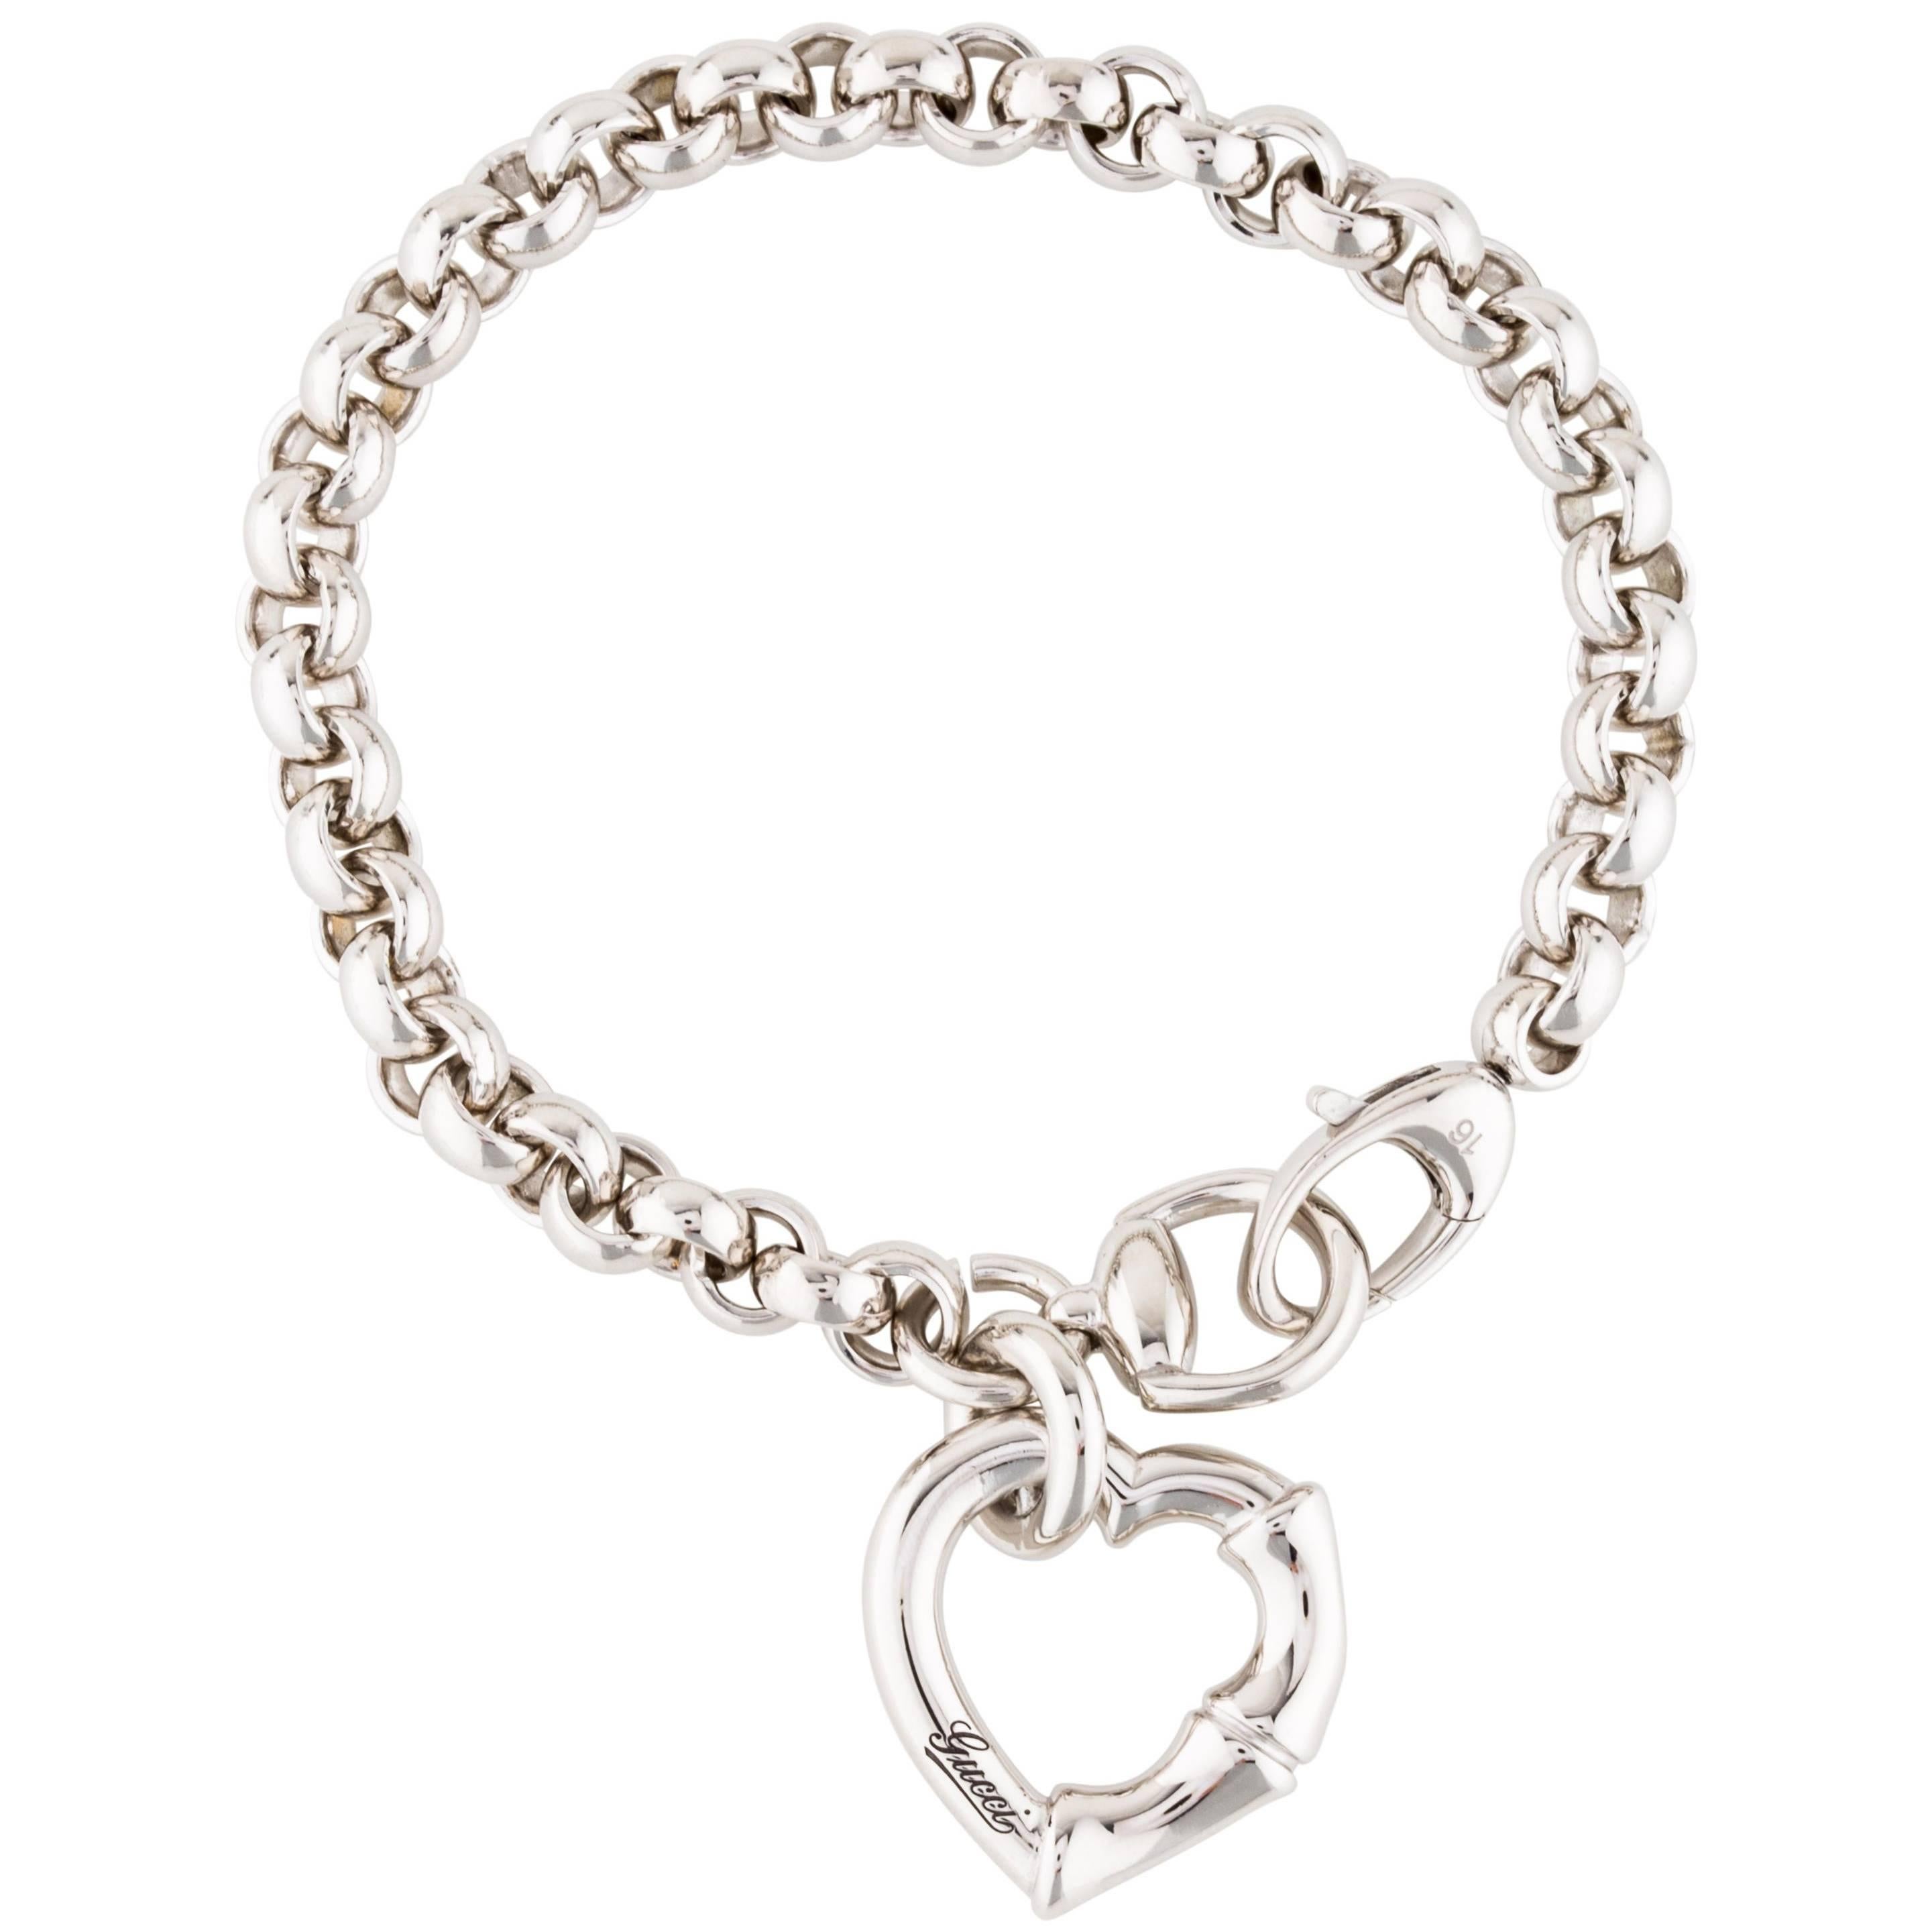 Gucci New Sterling Silver Chain Charm Bamboo Heart Bangle Bracelet in Box